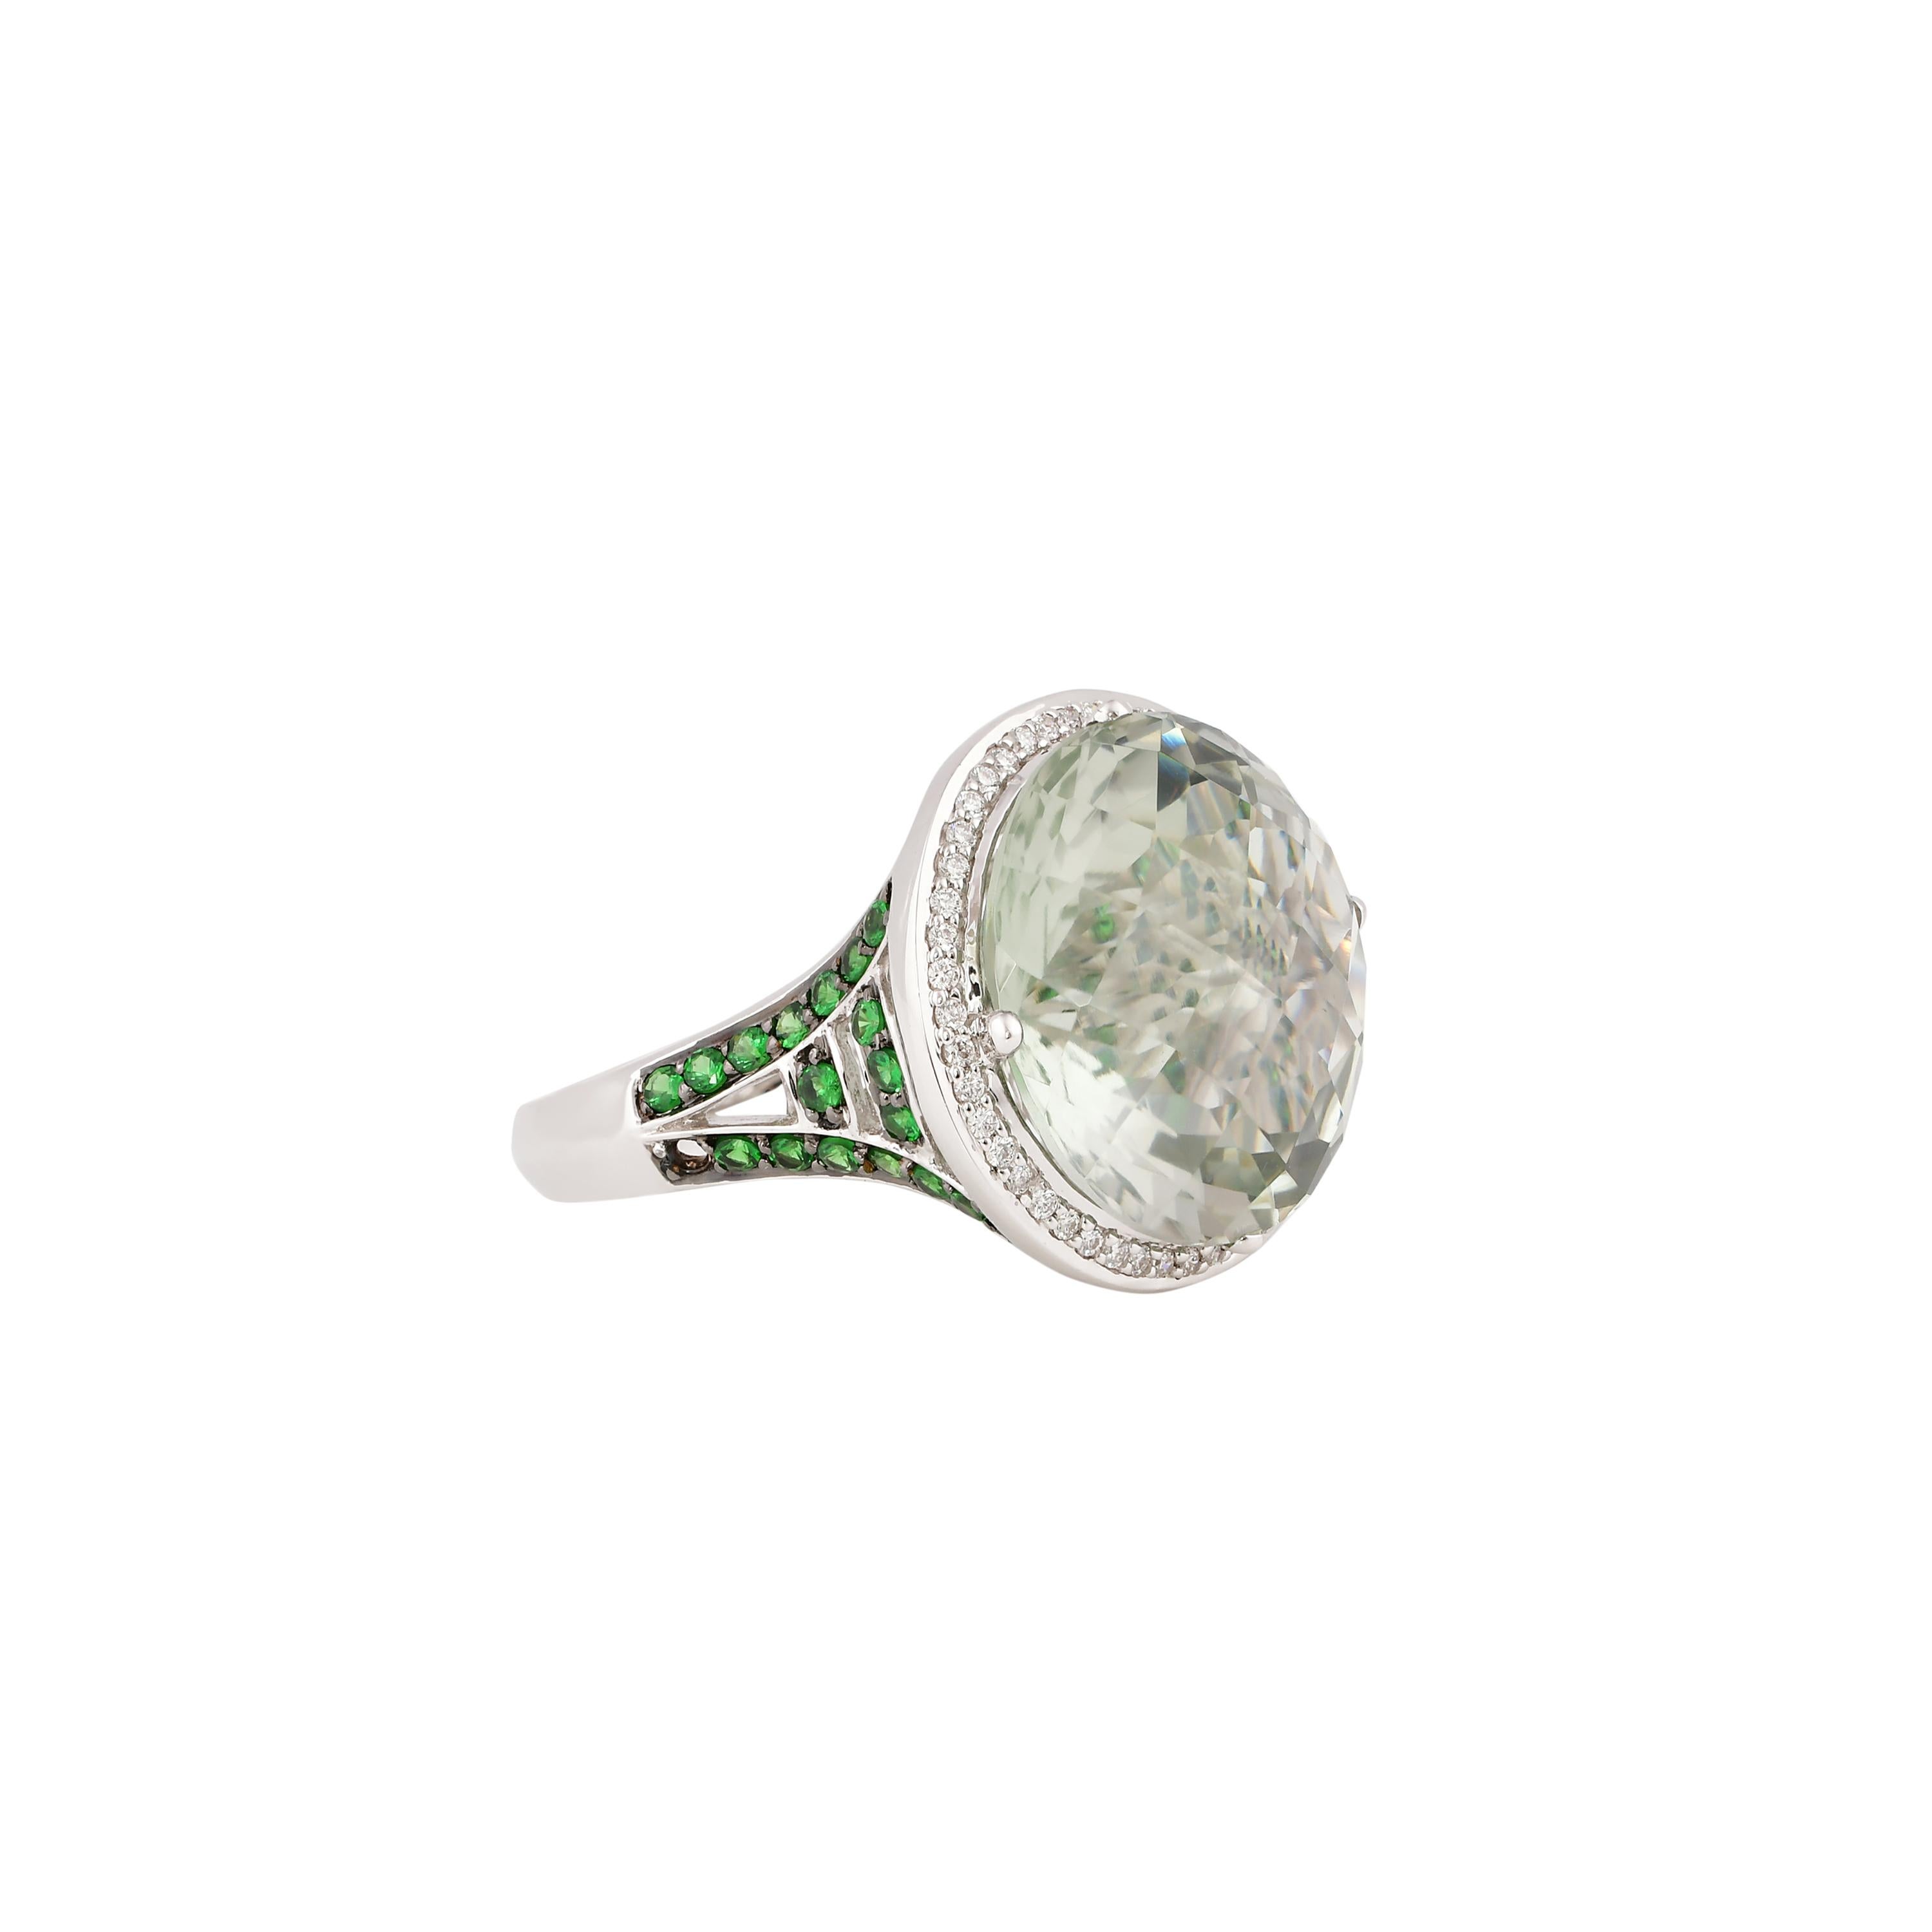 Contemporary 19 Carat Green Amethyst, Tsavorite and Diamond Ring in 14 Karat White Gold For Sale